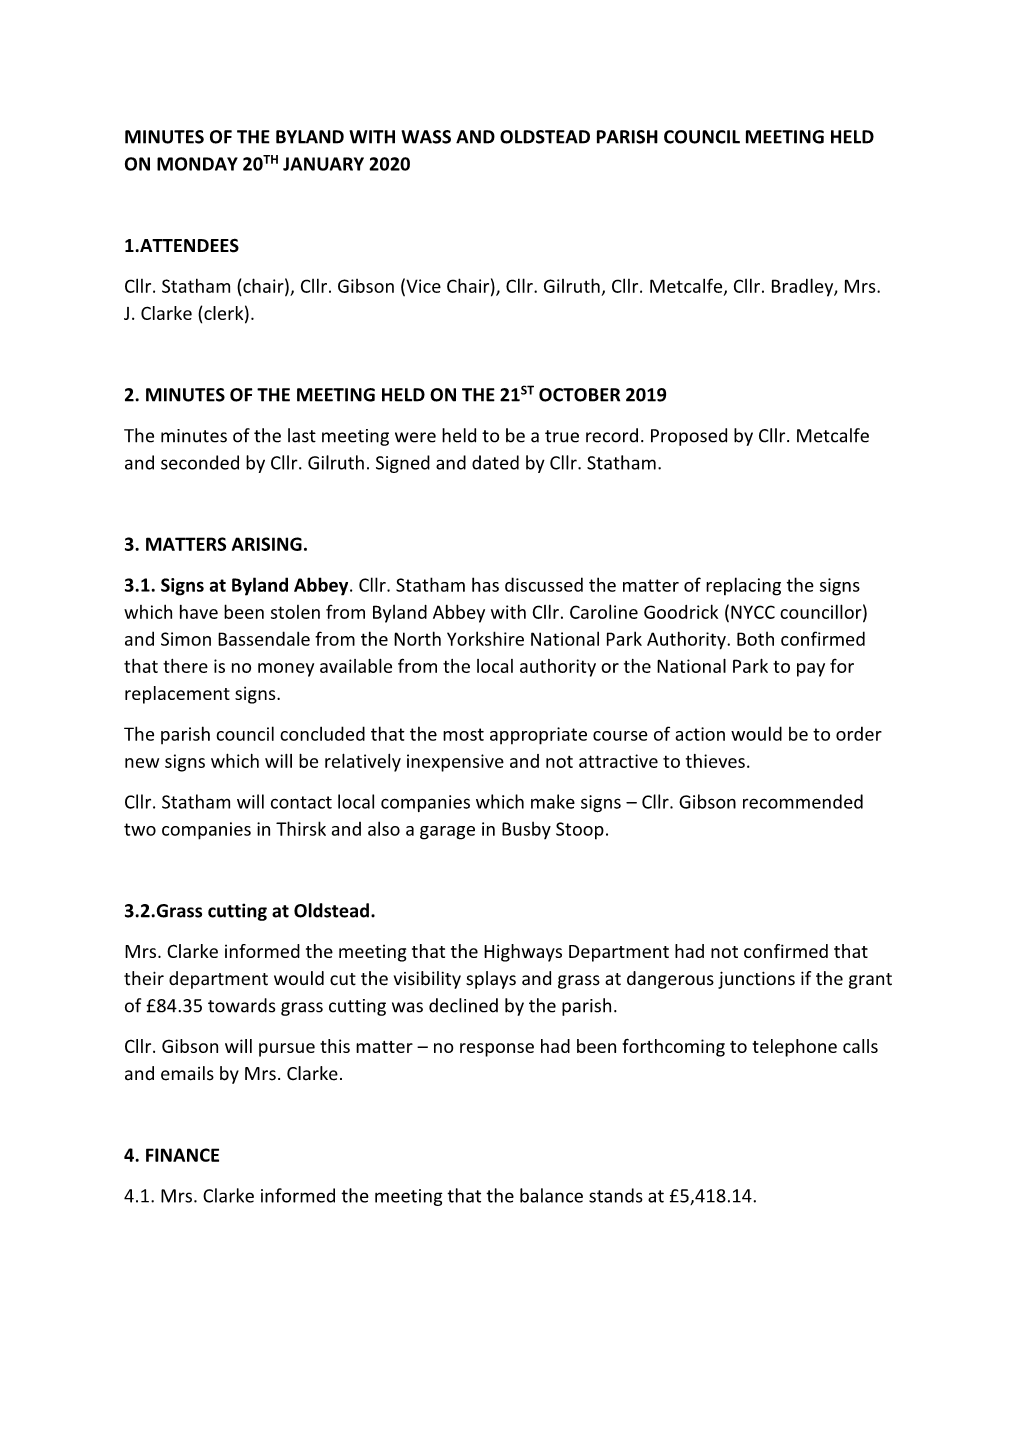 Minutes of the Byland with Wass and Oldstead Parish Council Meeting Held on Monday 20Th January 2020